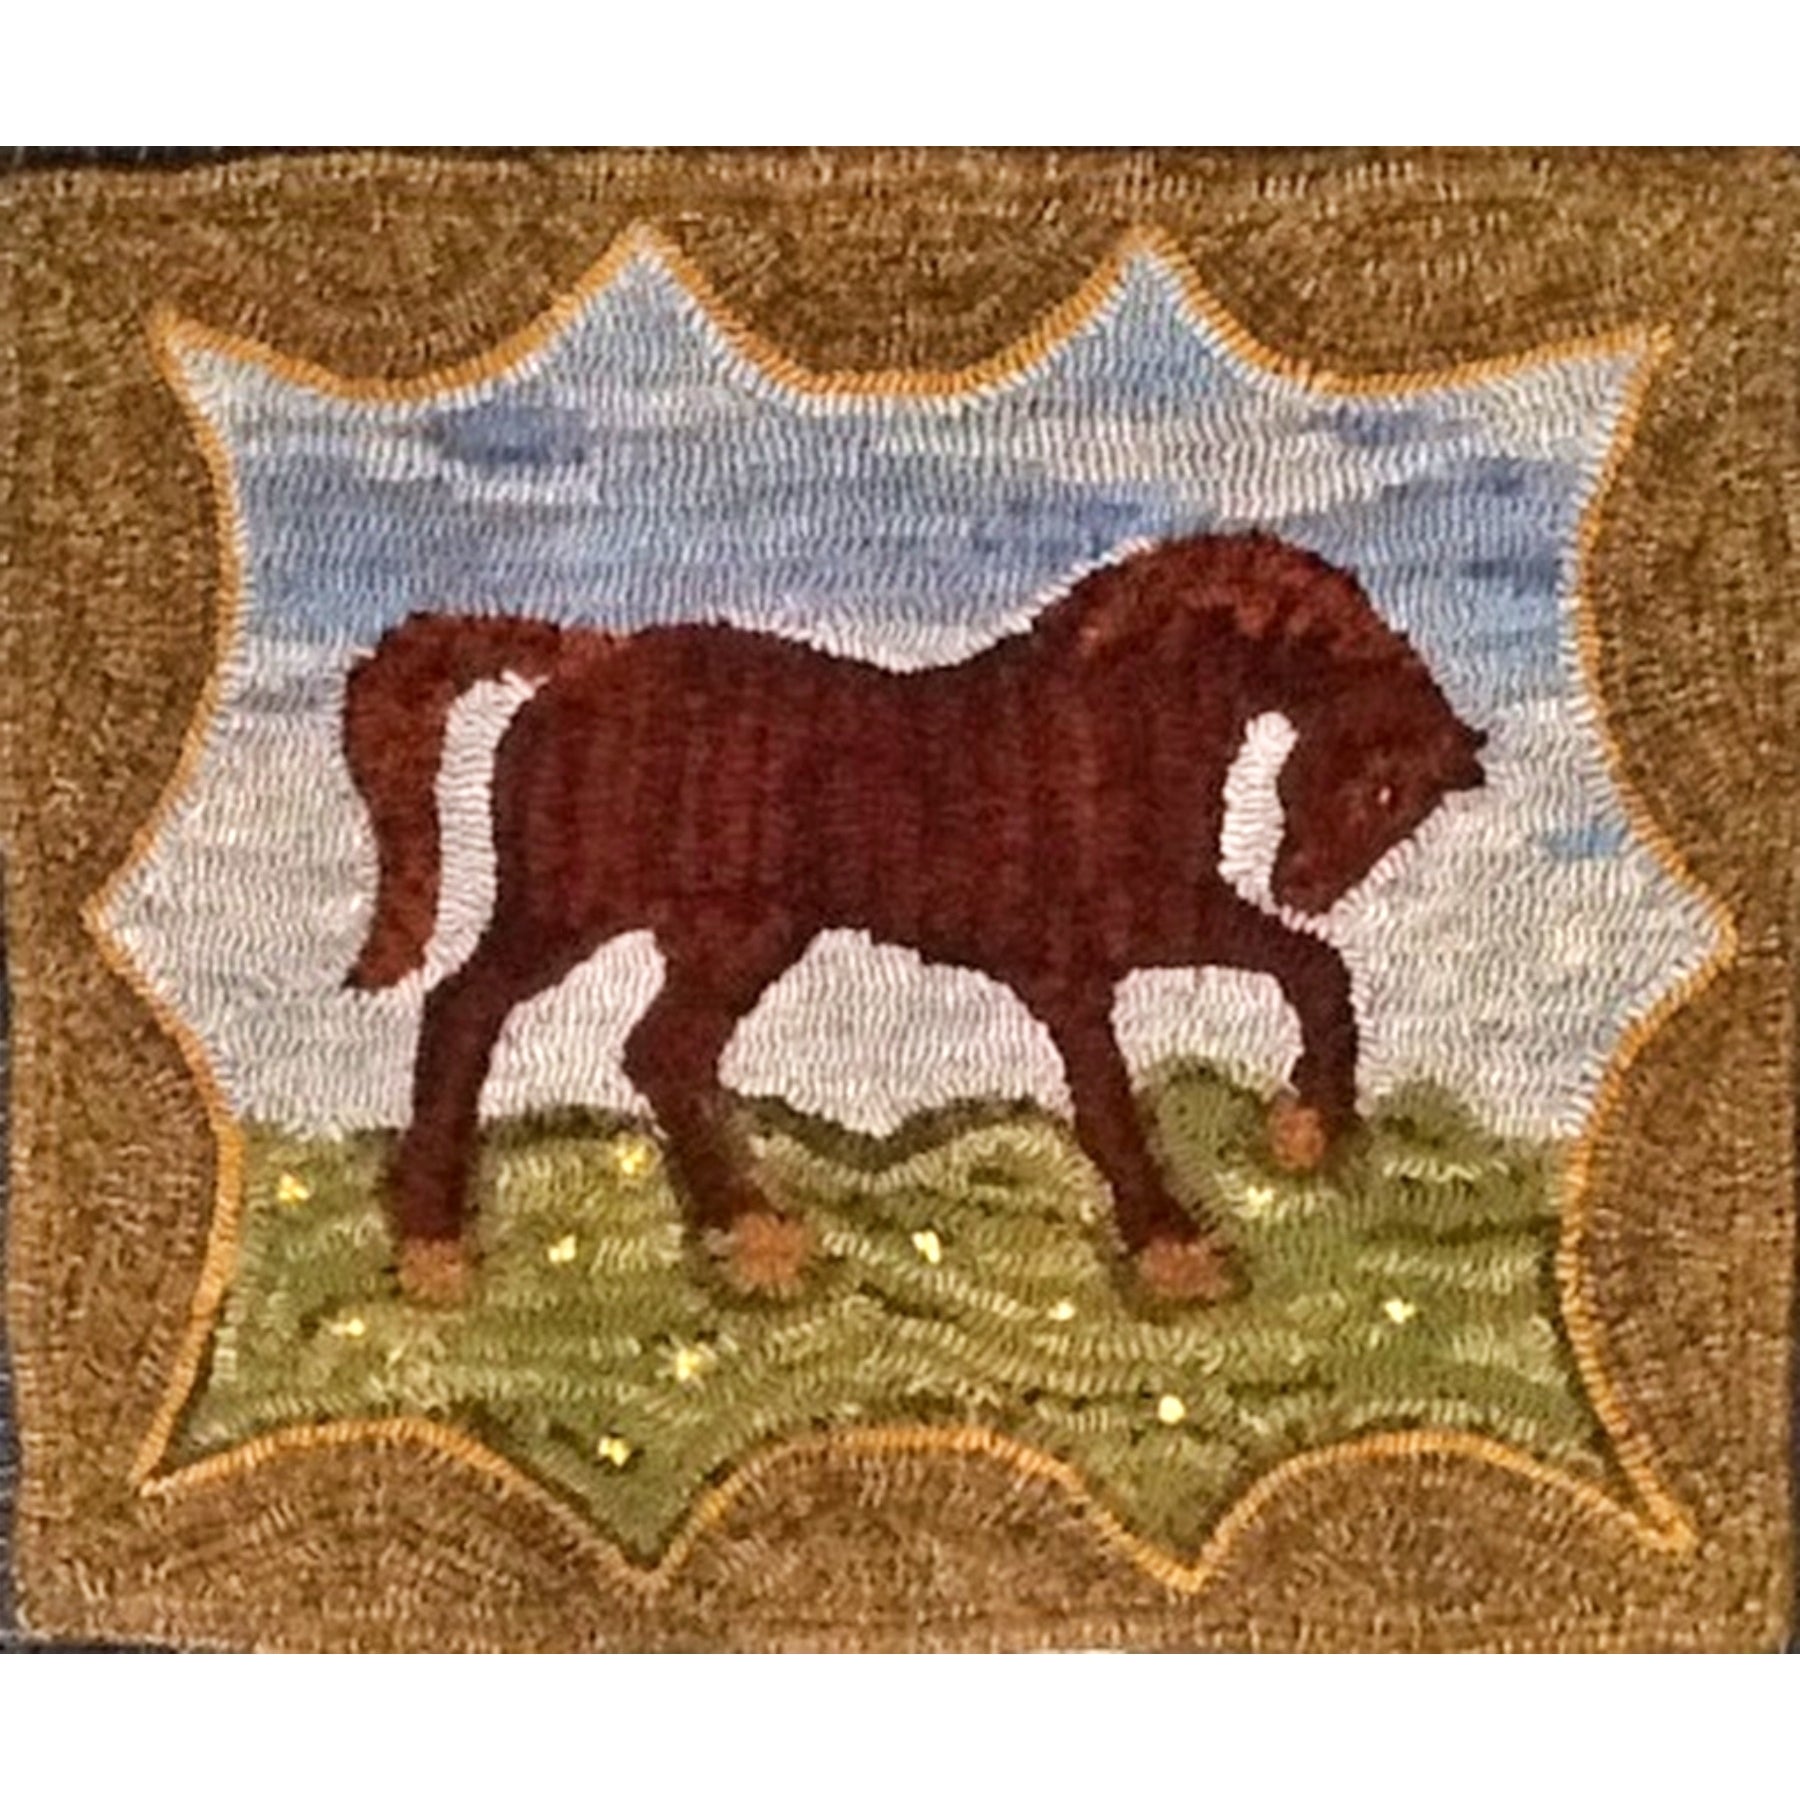 Horse, rug hooked by Kathy Kovaric